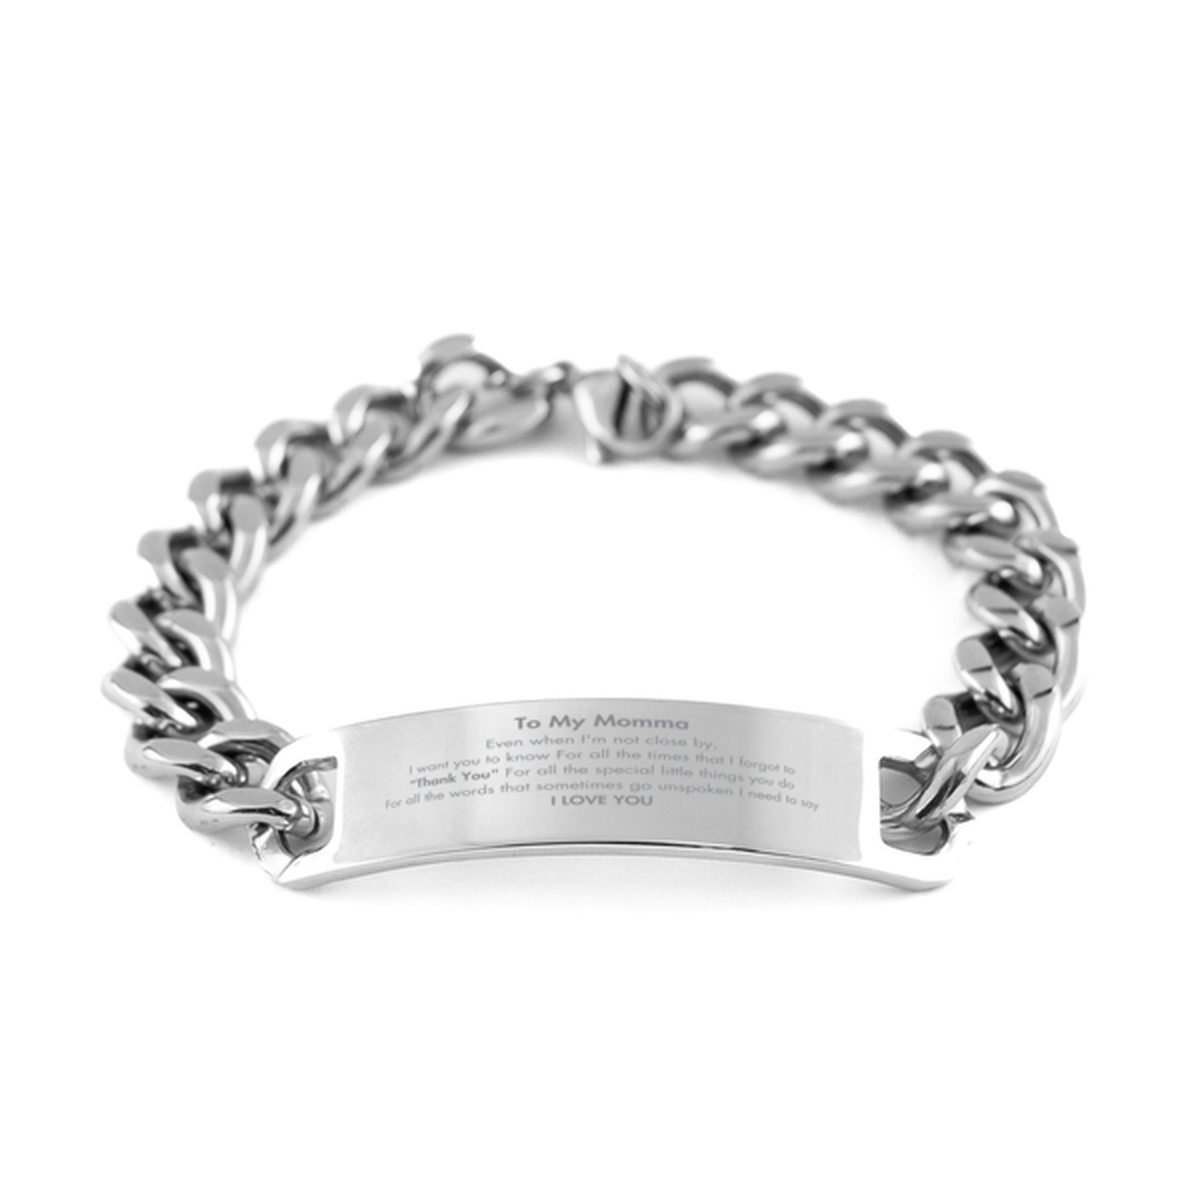 Thank You Gifts for Momma, Keepsake Cuban Chain Stainless Steel Bracelet Gifts for Momma Birthday Mother's day Father's Day Momma For all the words That sometimes go unspoken I need to say I LOVE YOU